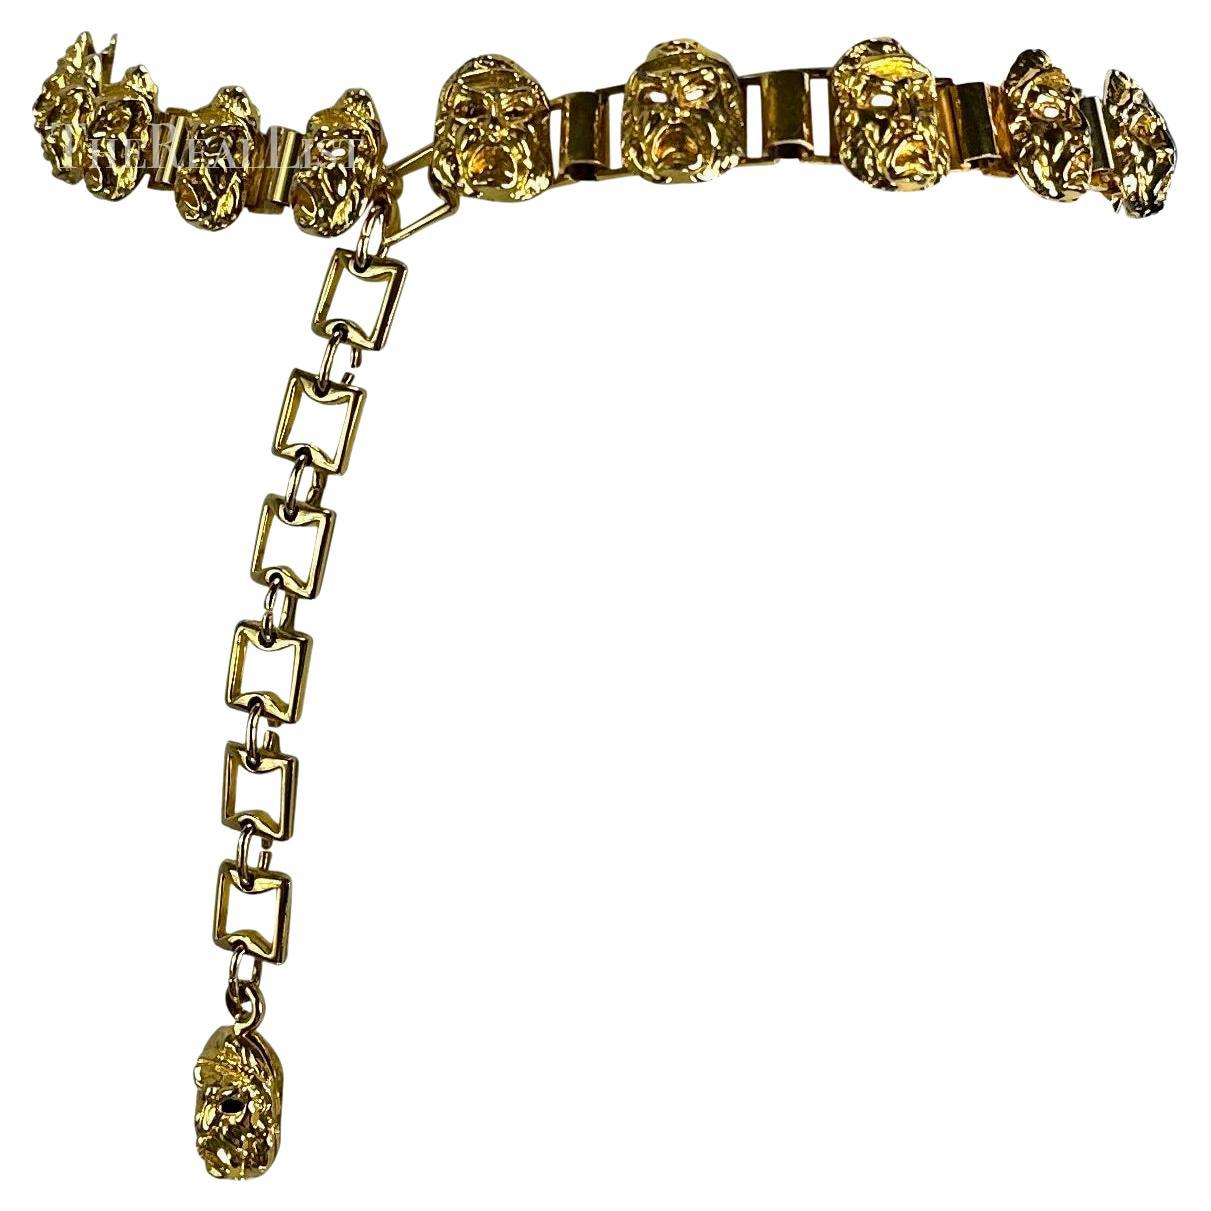 S/S 1992 Gianni Versace Gold Tone Roman Mask Chain Belt  For Sale 4